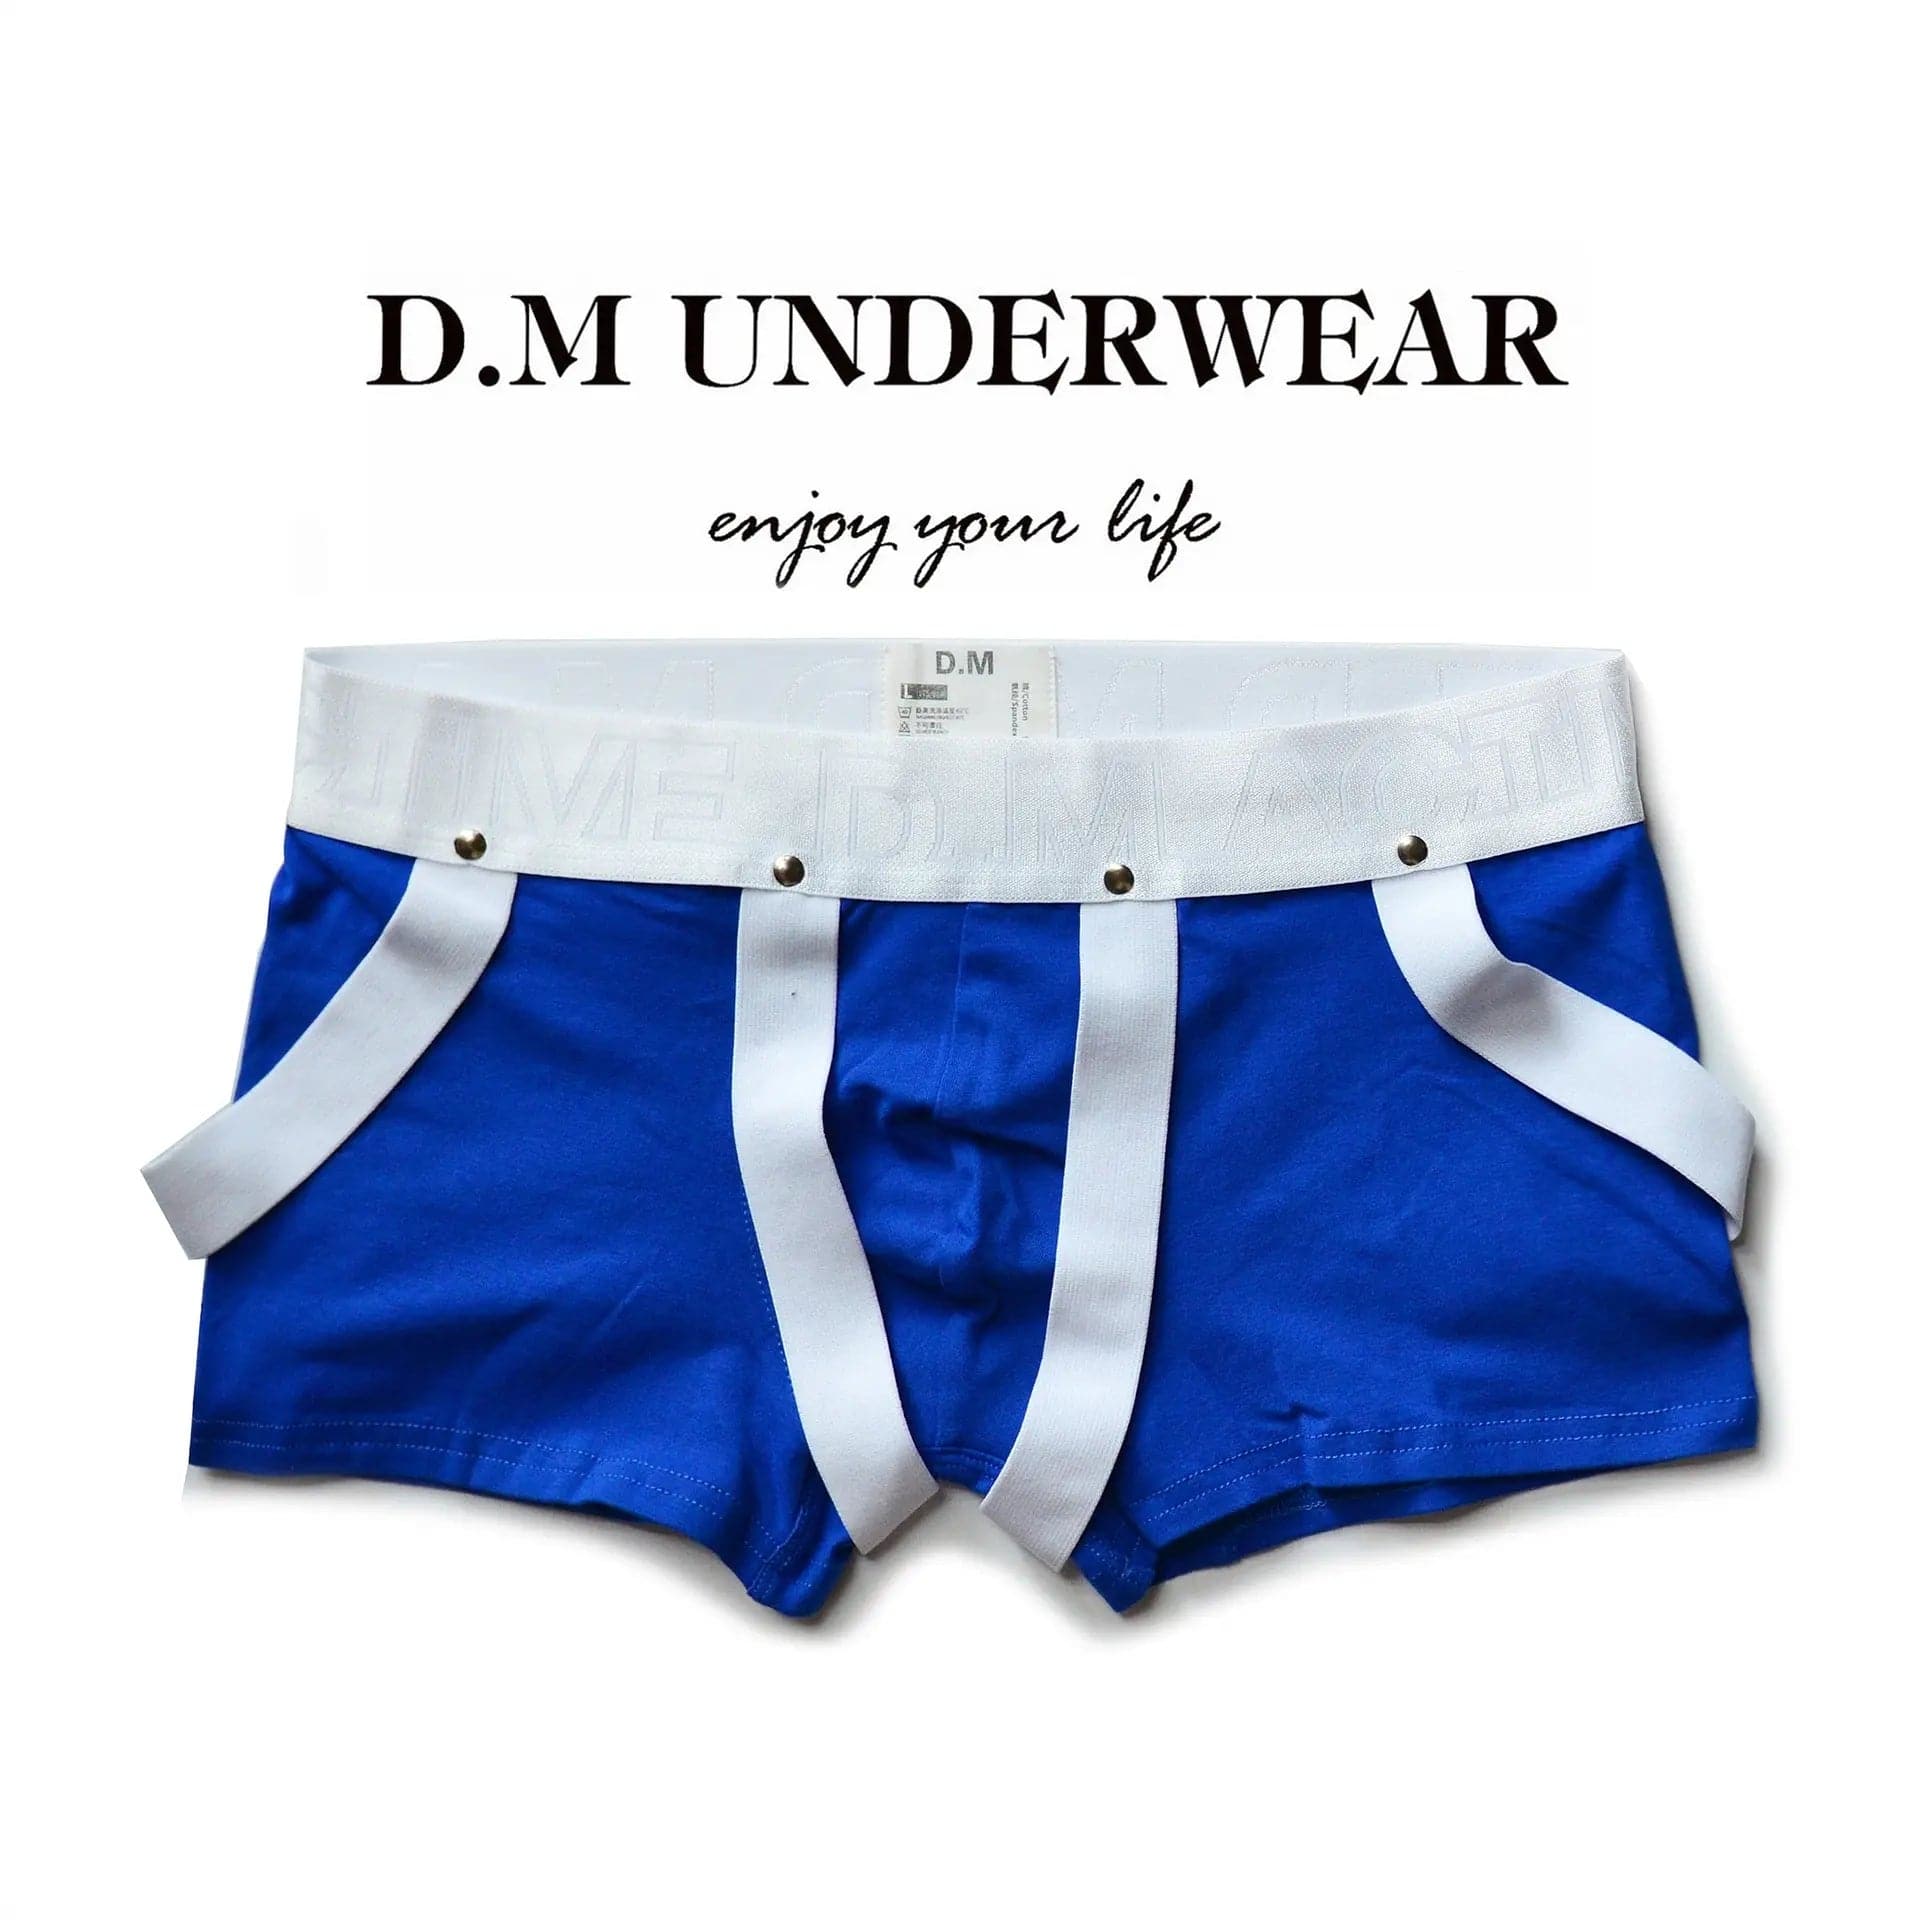 D.M Low Waist Sexy Boxers Black and White Rings D.M UNDERWEAR